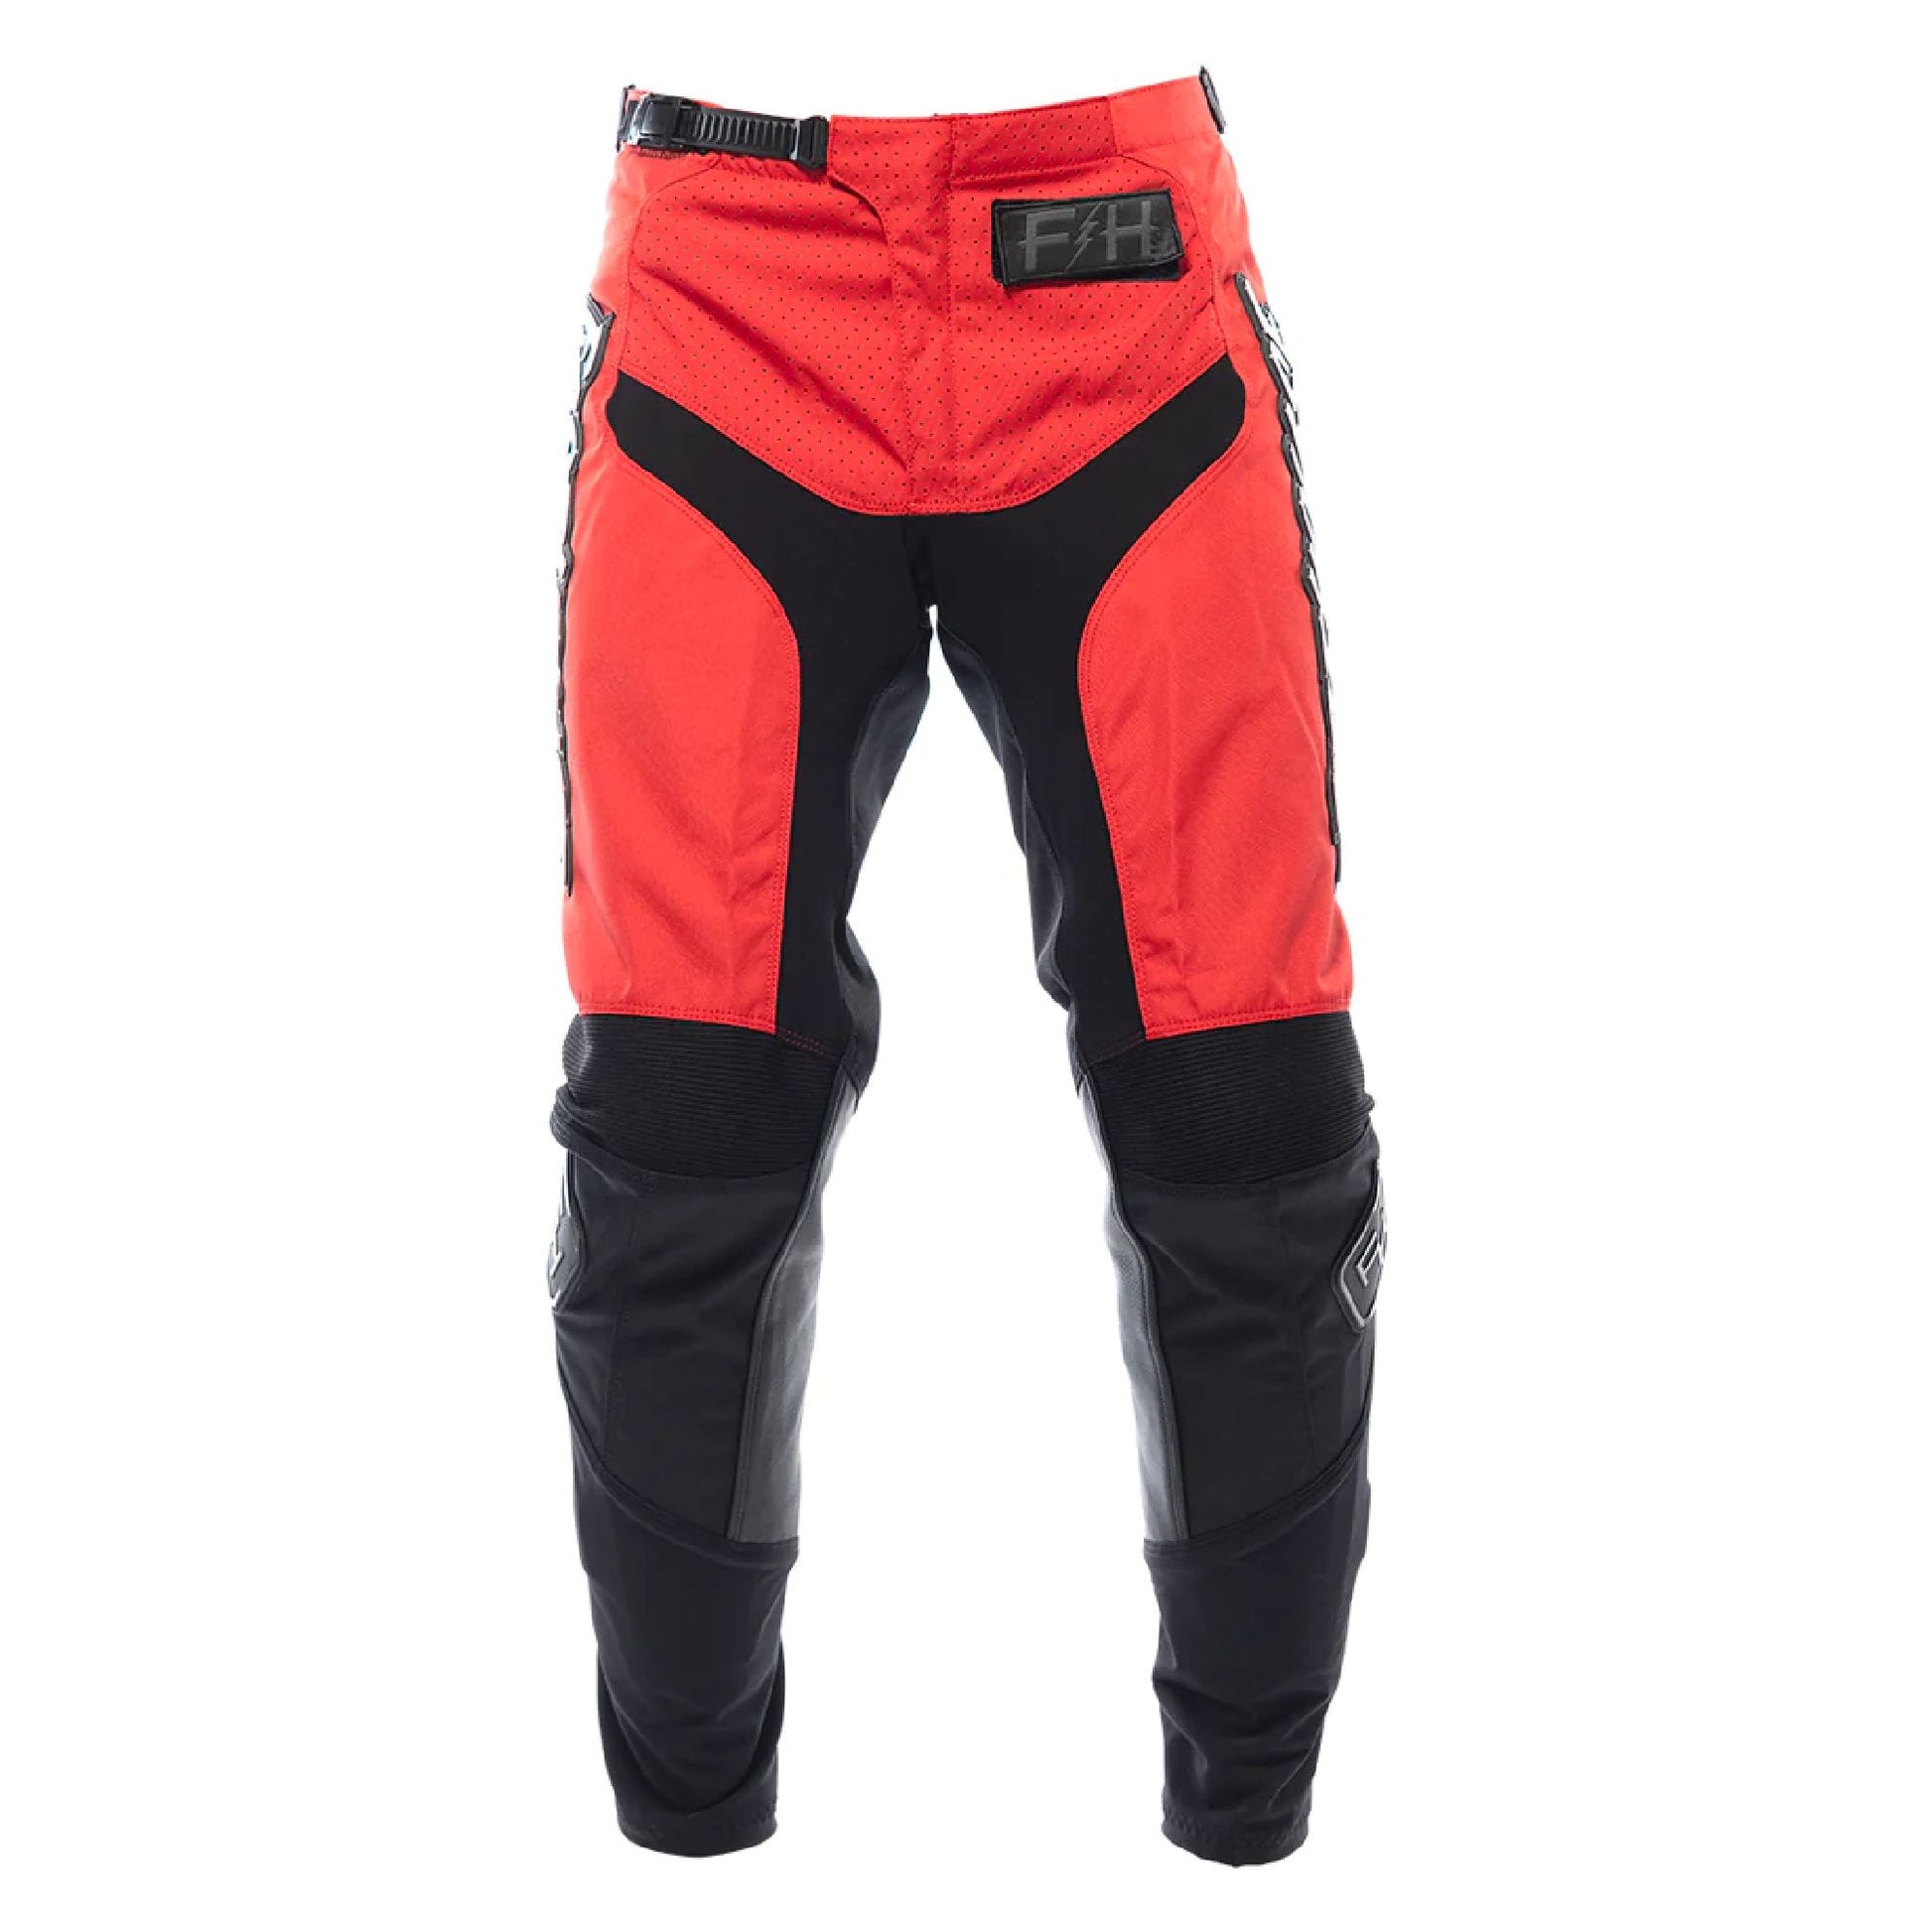 Fasthouse Grindhouse Pants Red Black Bike Pants